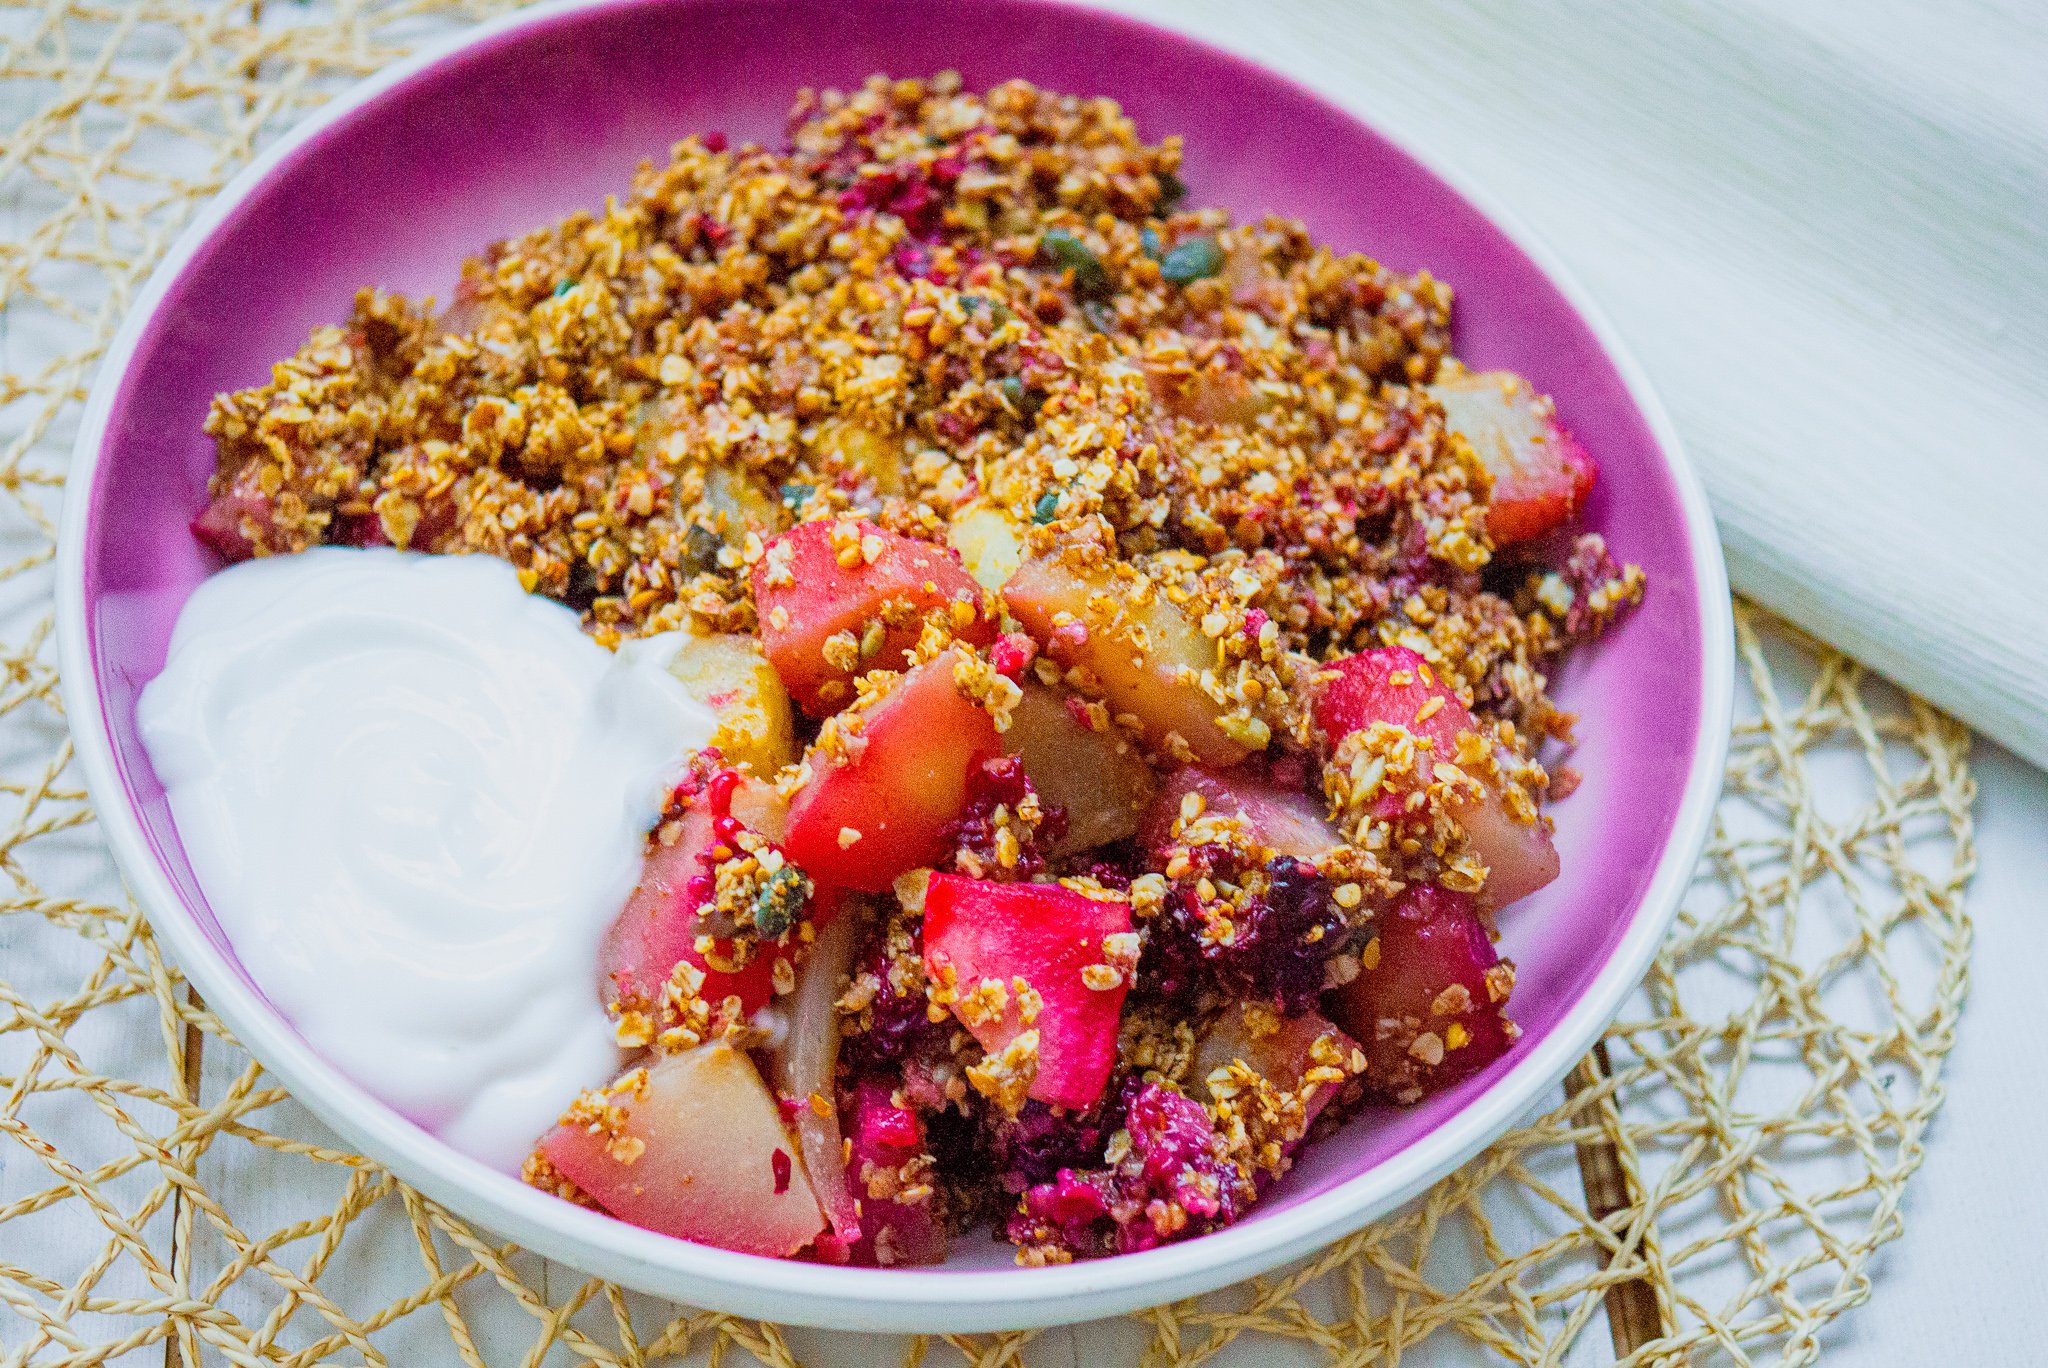 pear and blackberry crumble by kam sokhi allergy chef 